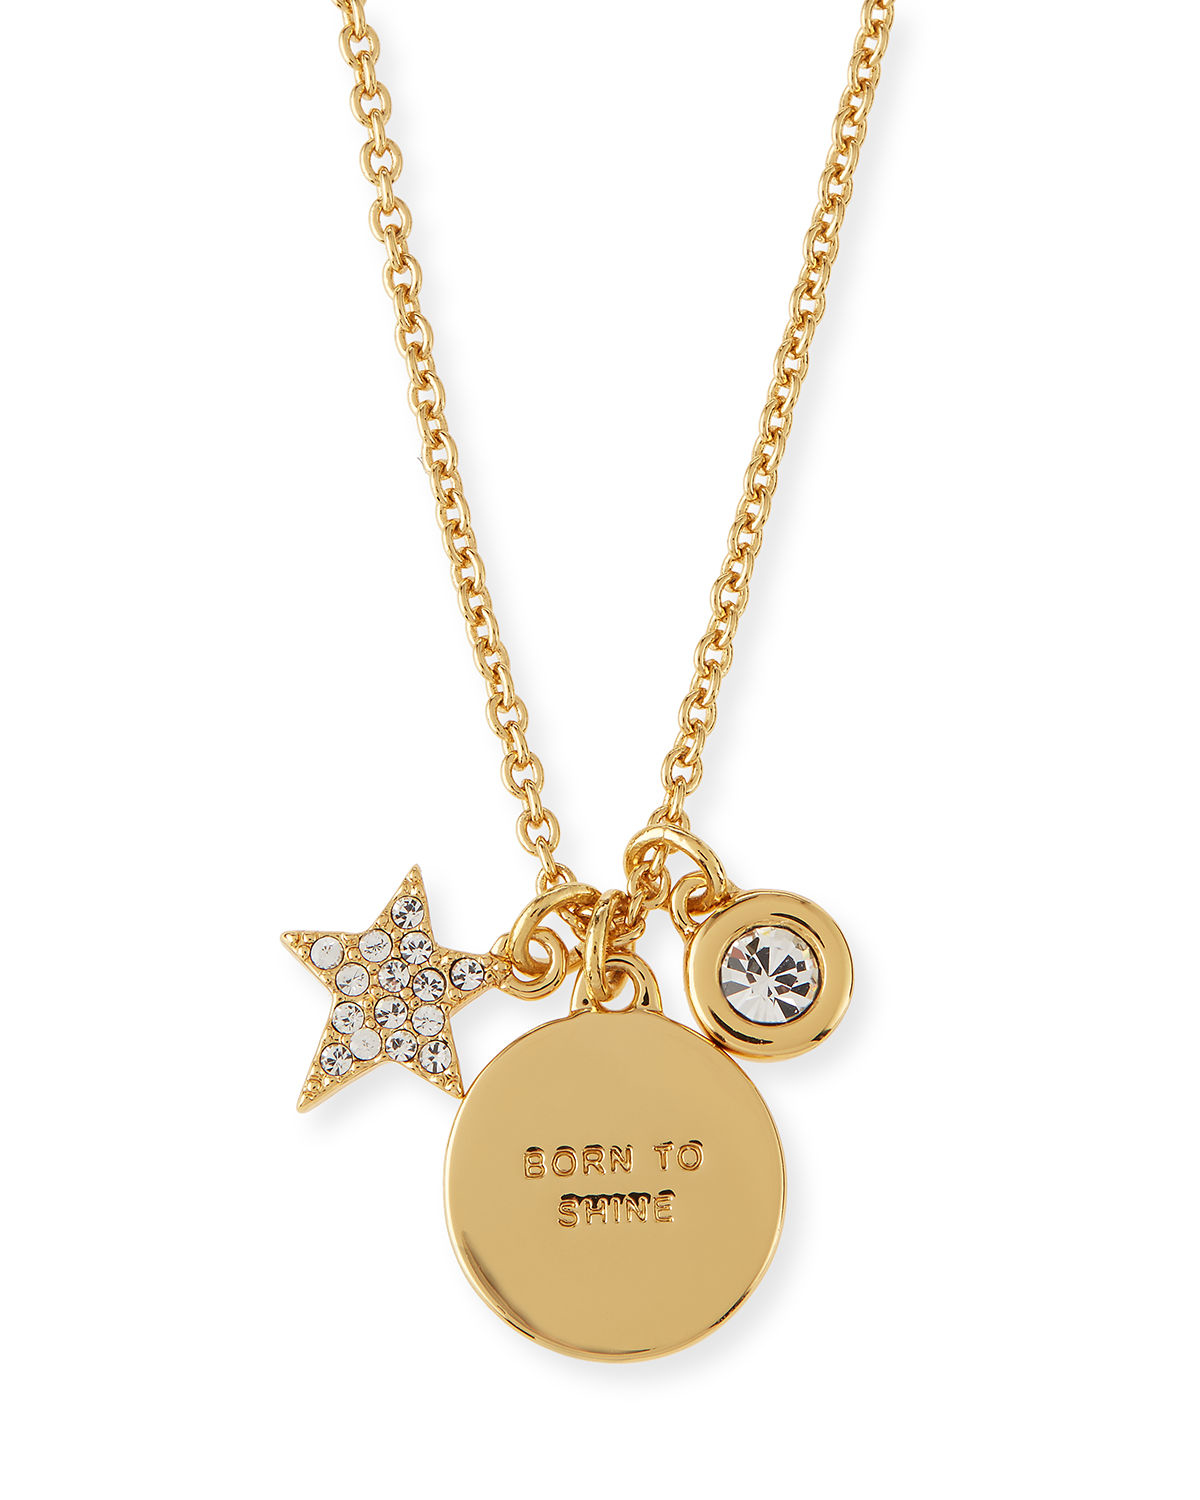 Lyst - Kate spade new york Crystal Charm Pendant Necklace ...